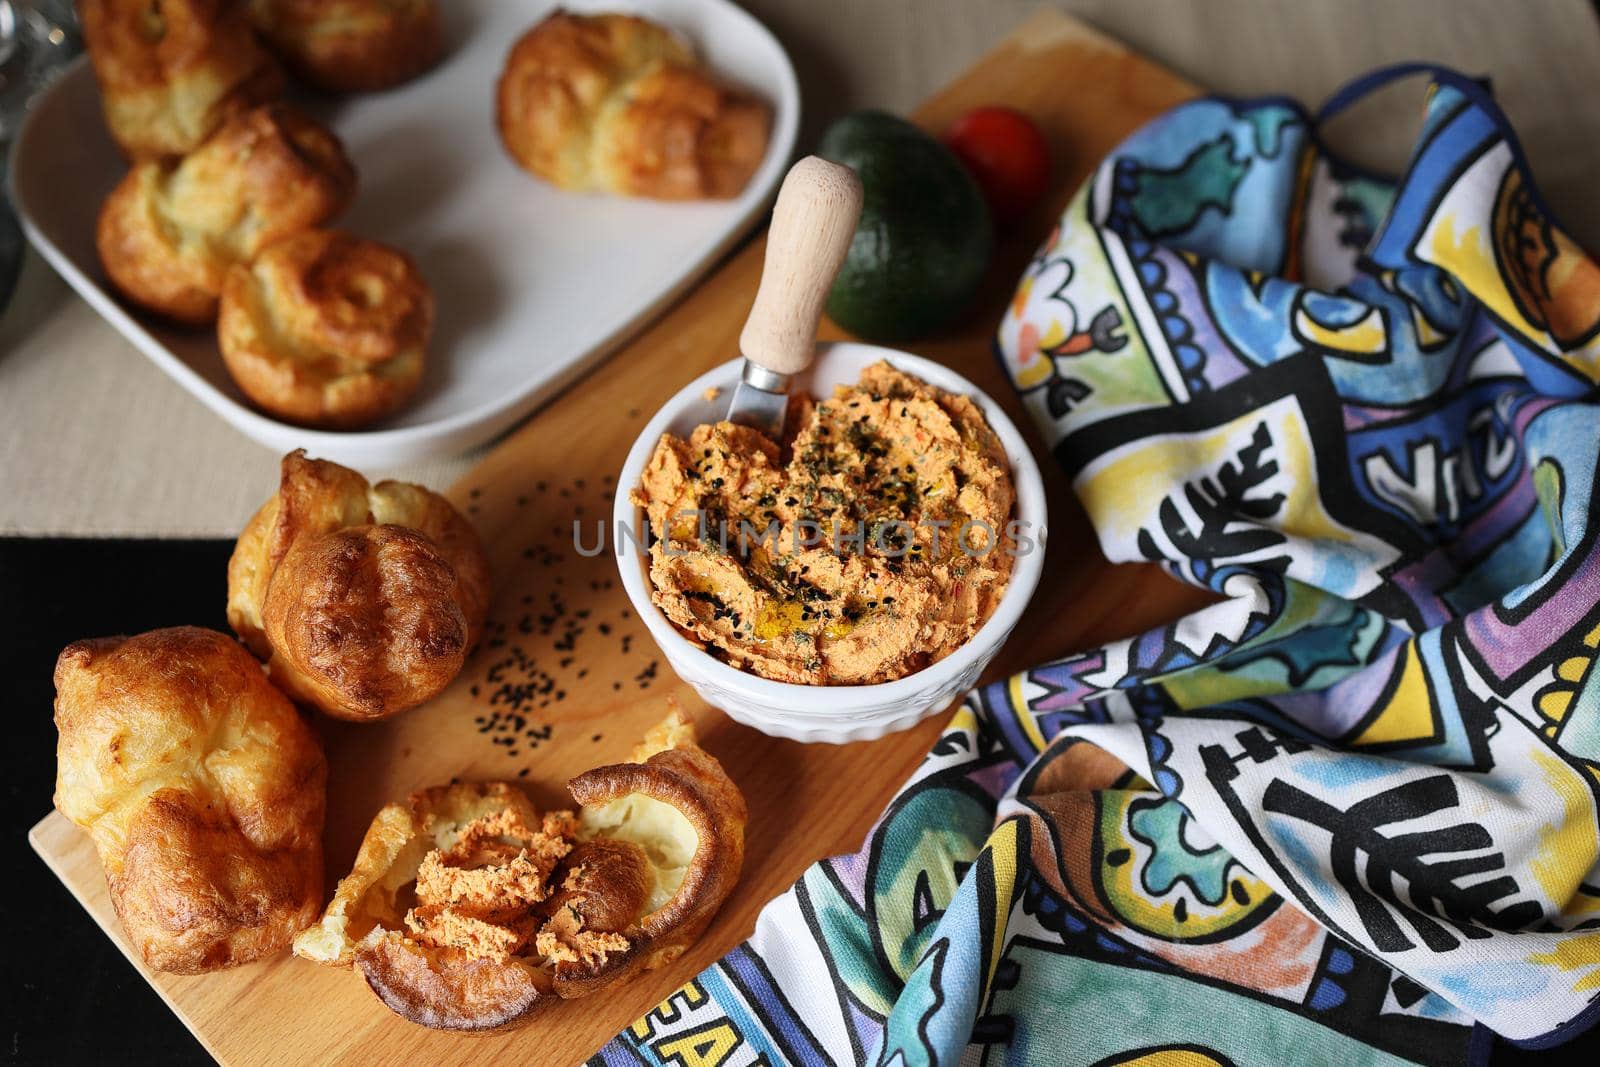 ricotta dip with sun-dried tomatoes and baked paprika in a ceramic white bowl and homemade popover, which is a puffed, airy, and eggy hollow roll, is fresh from the oven by Proxima13